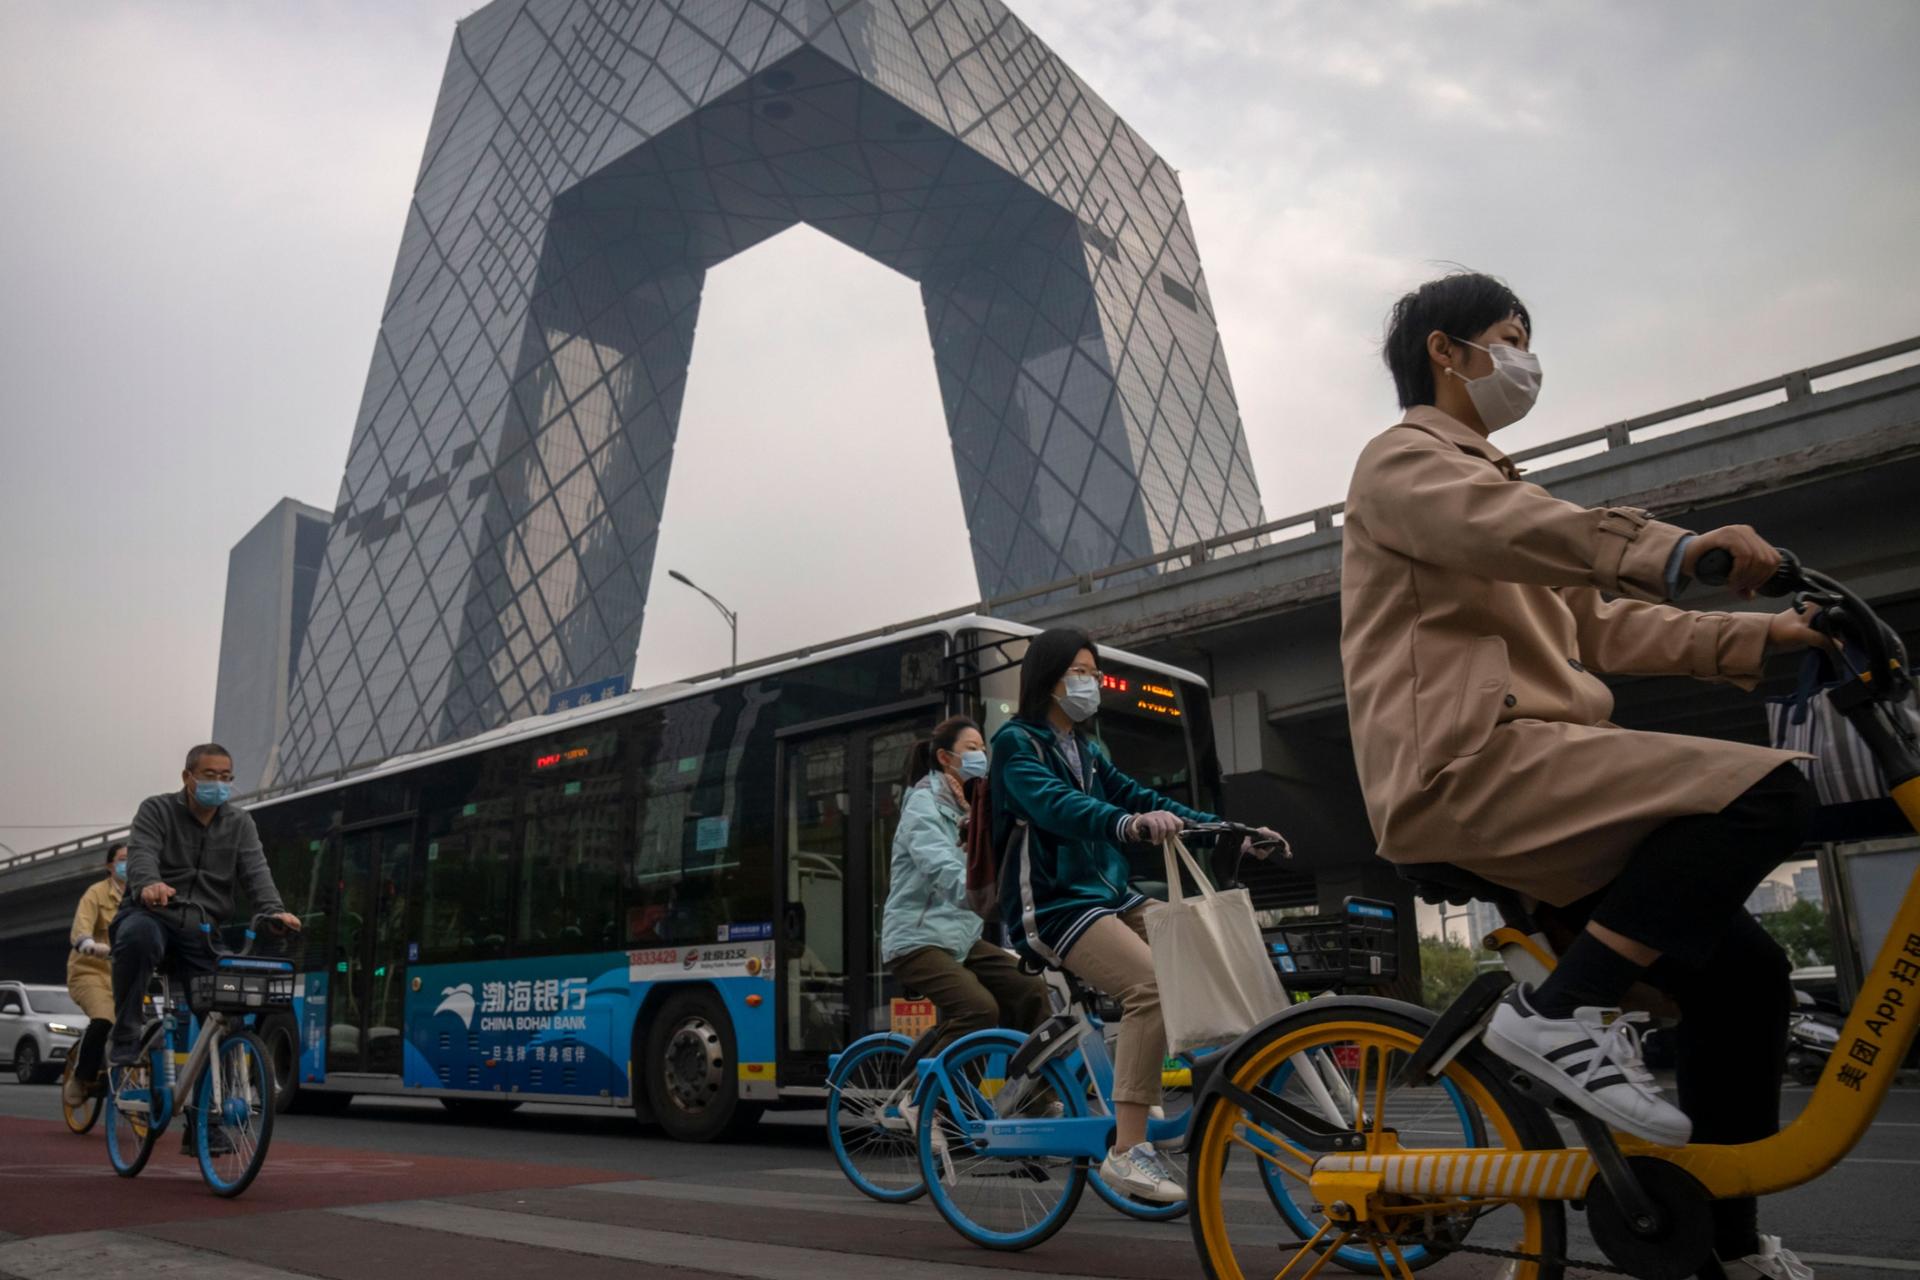 Commuters wearing face masks ride bicycles along a street in the central business district in Beijing, Thursday, Oct. 20, 2022.